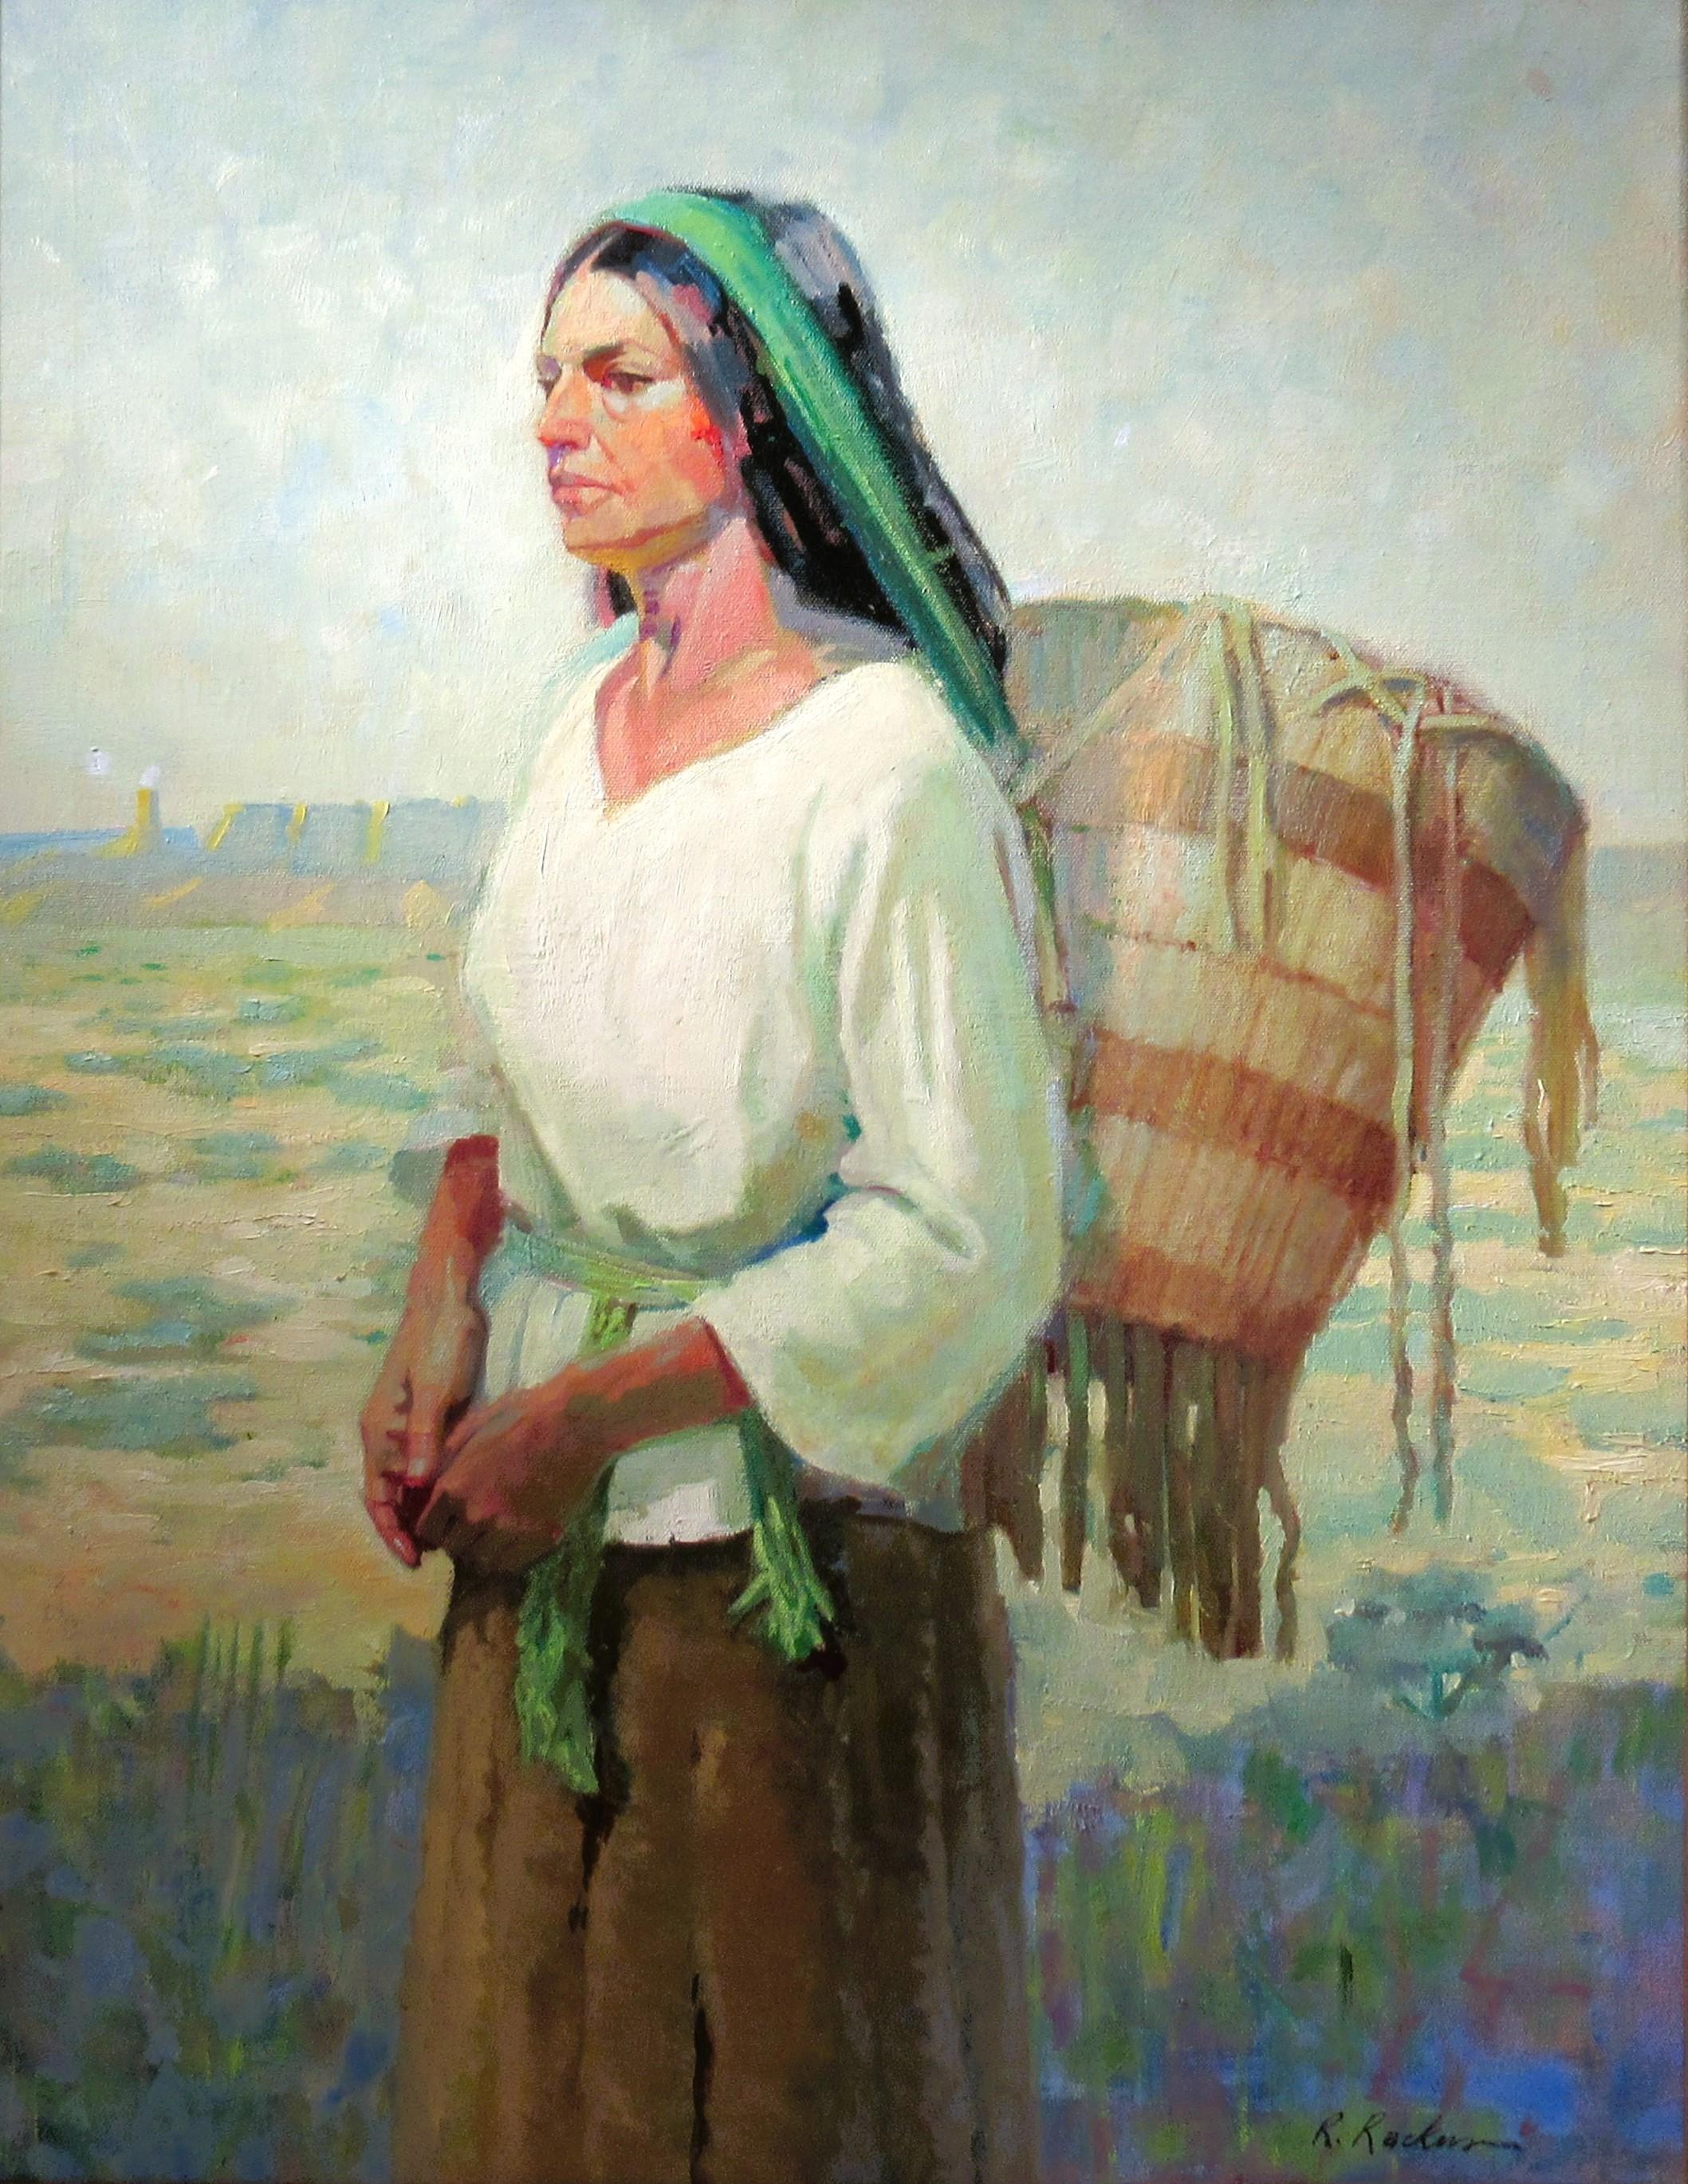 Native American Woman with Basket - Painting by Richard Rackus